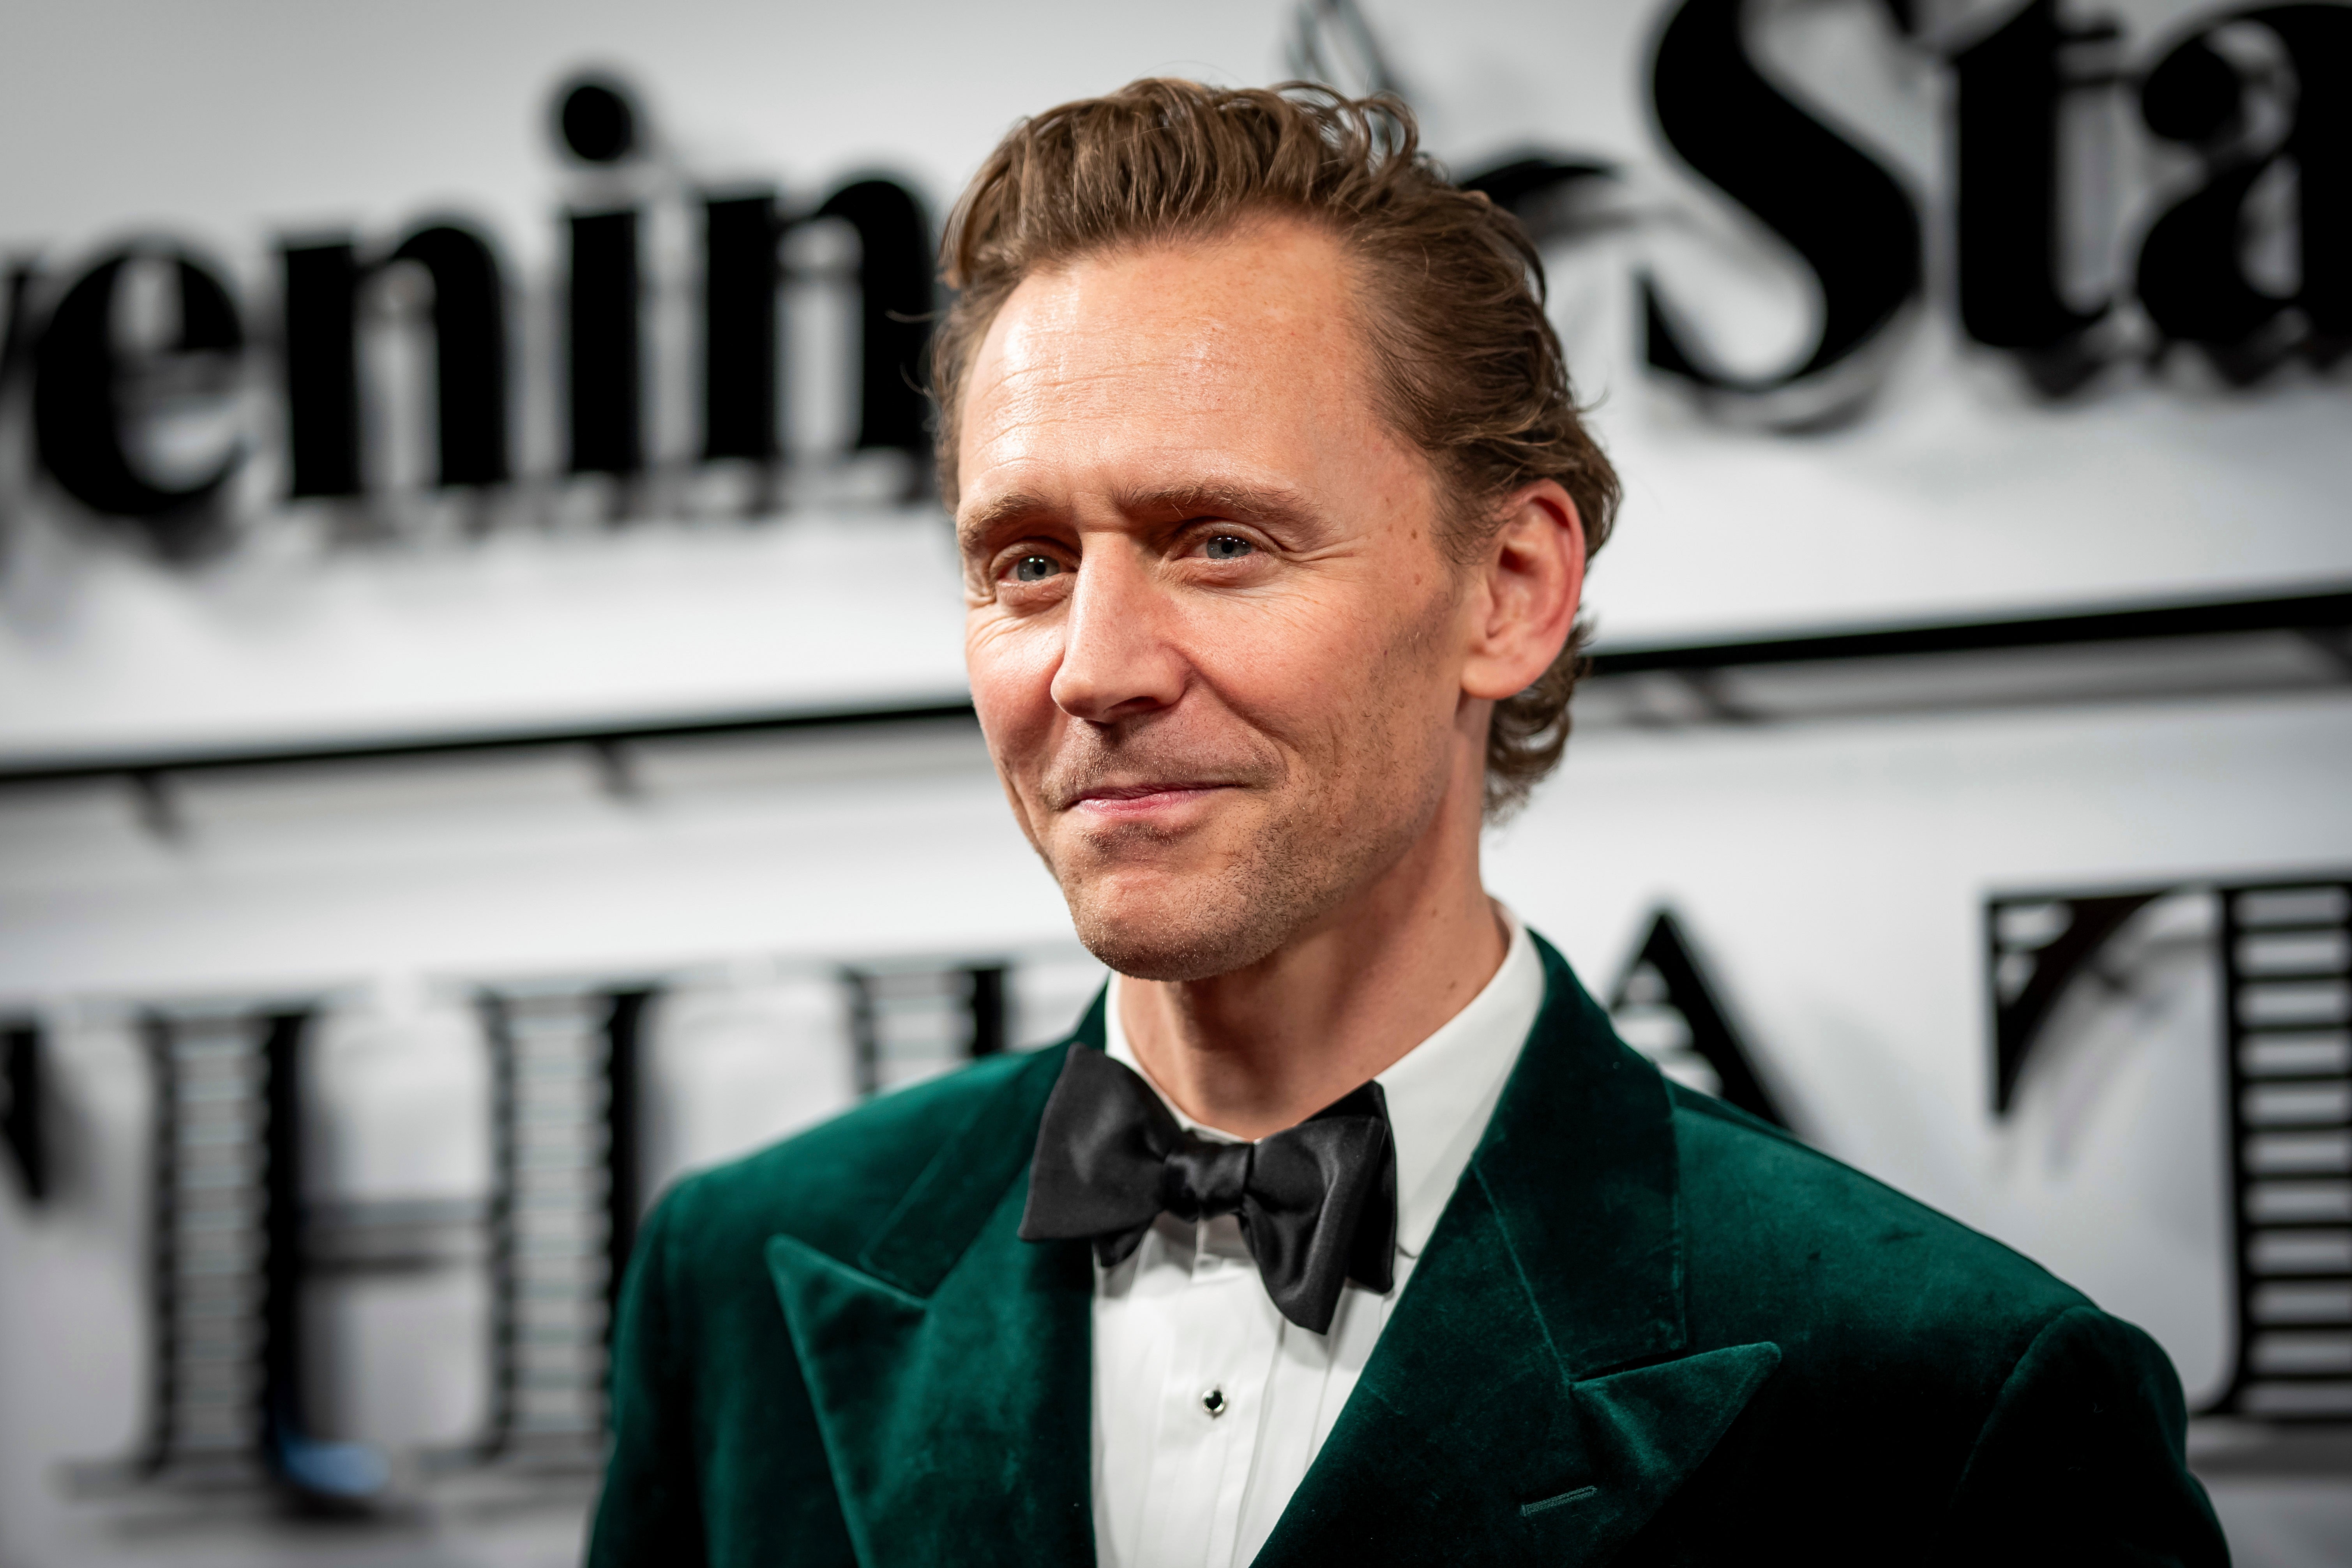 Tom Hiddleston was also spotted on the red carpet ahead of the prestigious event